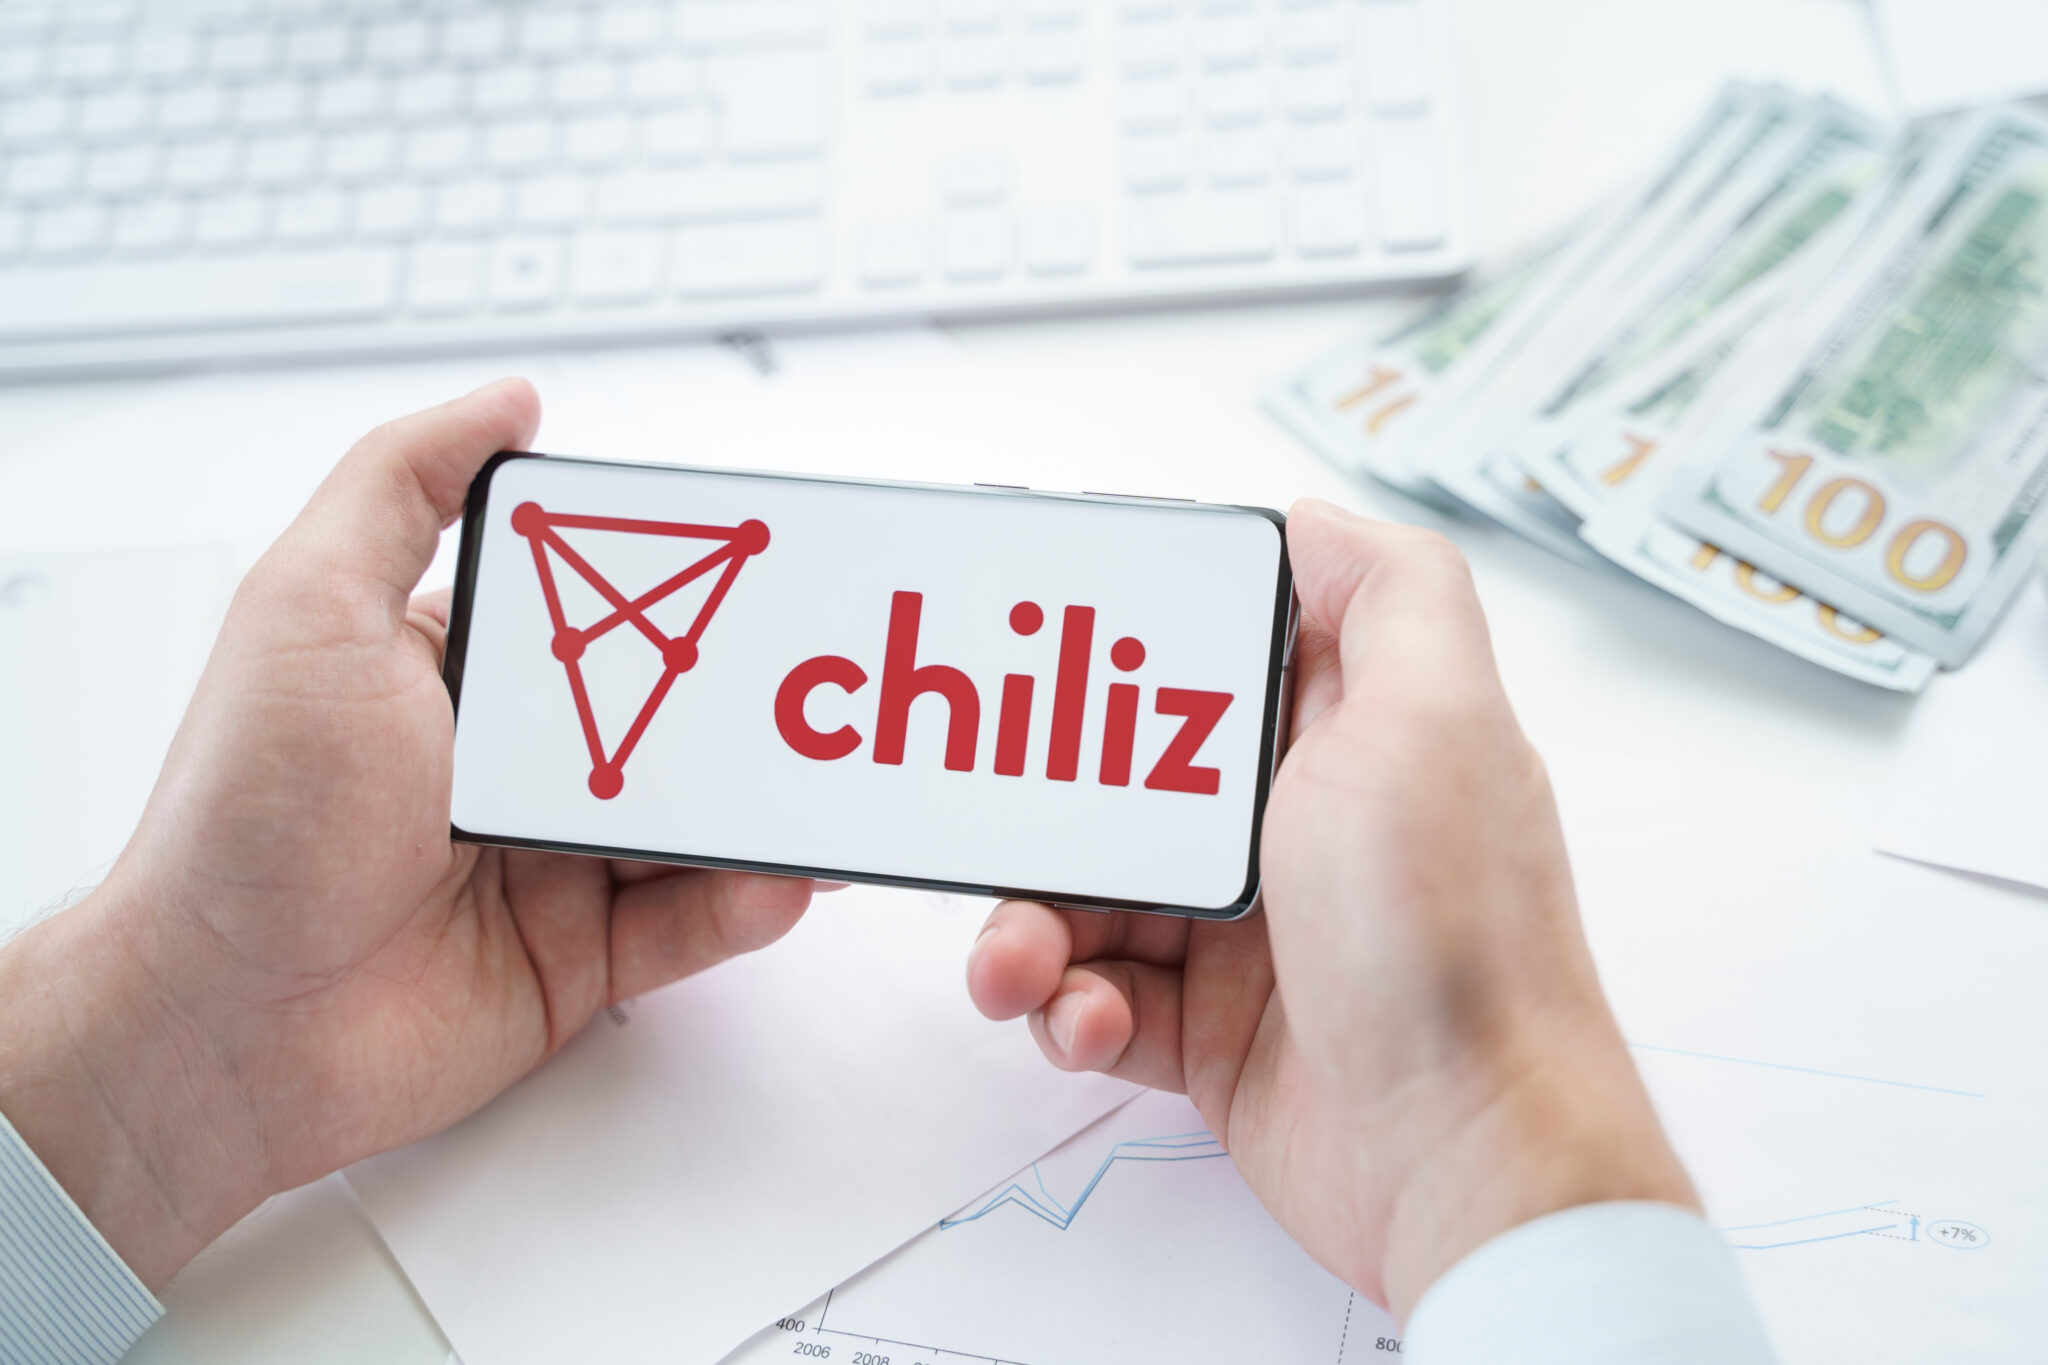 Russia Moscow 20.05.2021 Chiliz,CHZ logo in mobile phone.Cryptocurrency decentralized exchange DEX.Trading blockchain platform.Swap,buy,sell crypto token,digital coin Bitcoin,Ethereum.Business,invest.